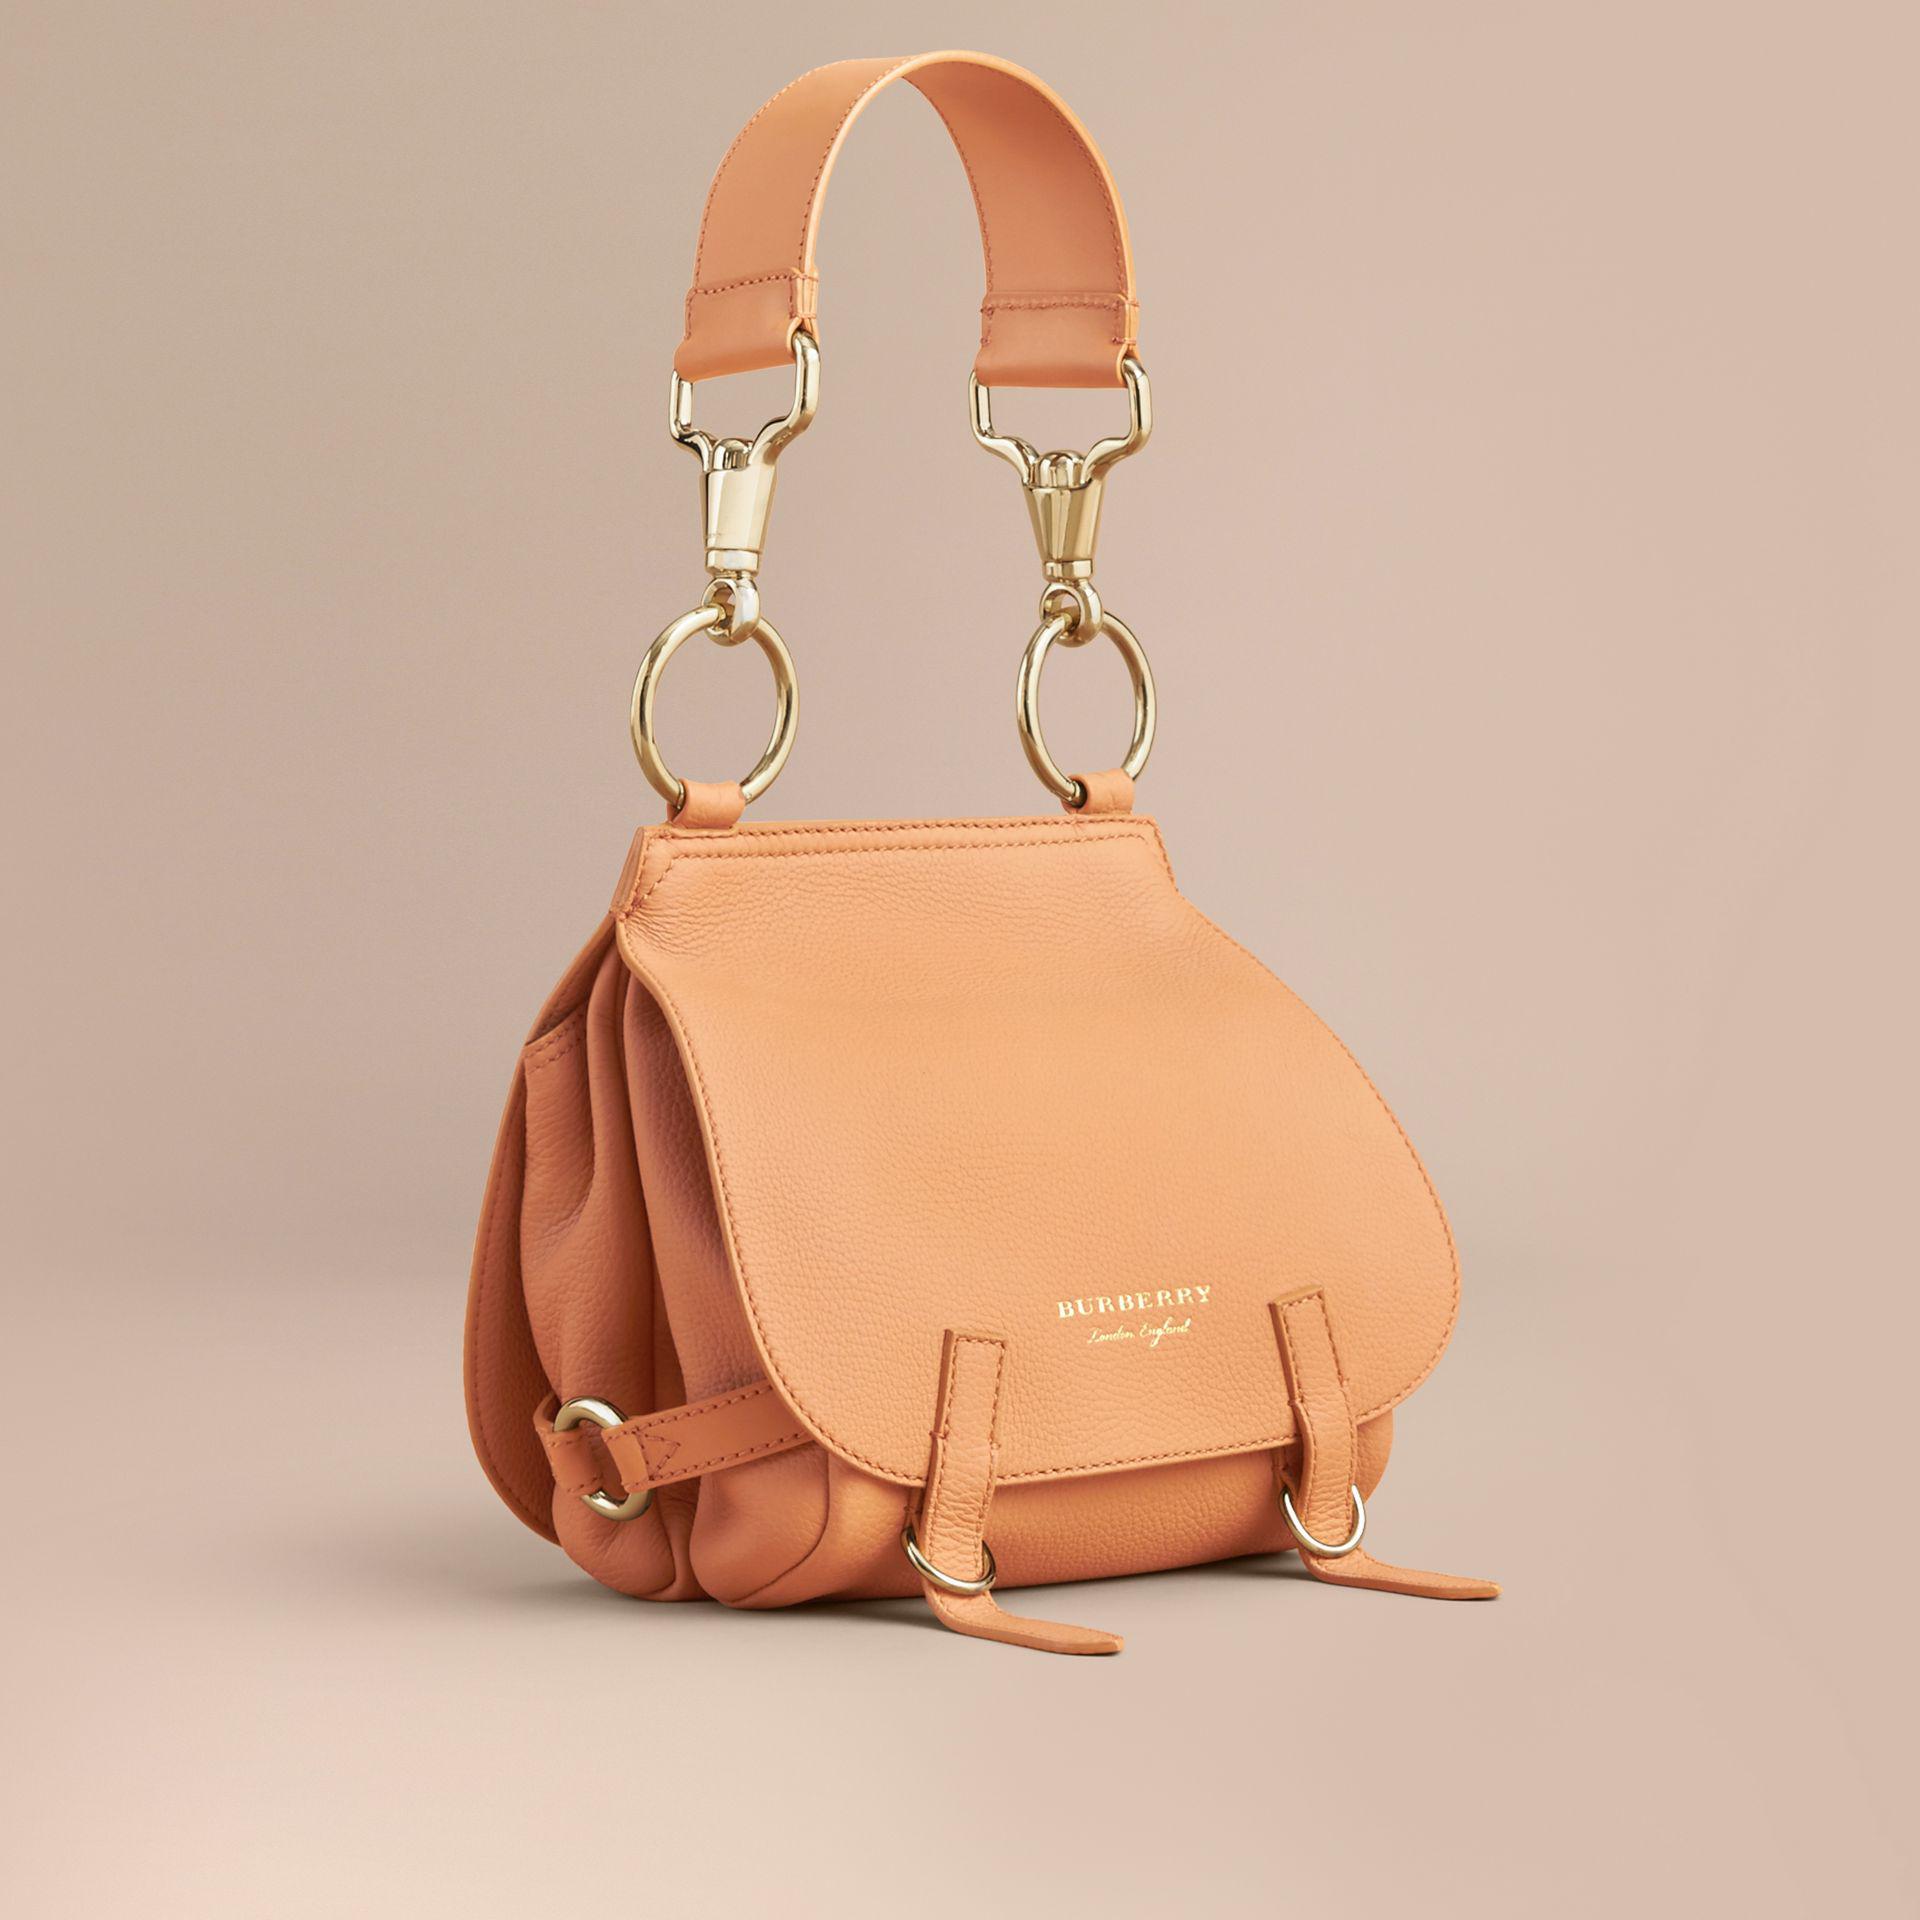 Burberry The Bridle Bag In Deerskin Pale Clementine